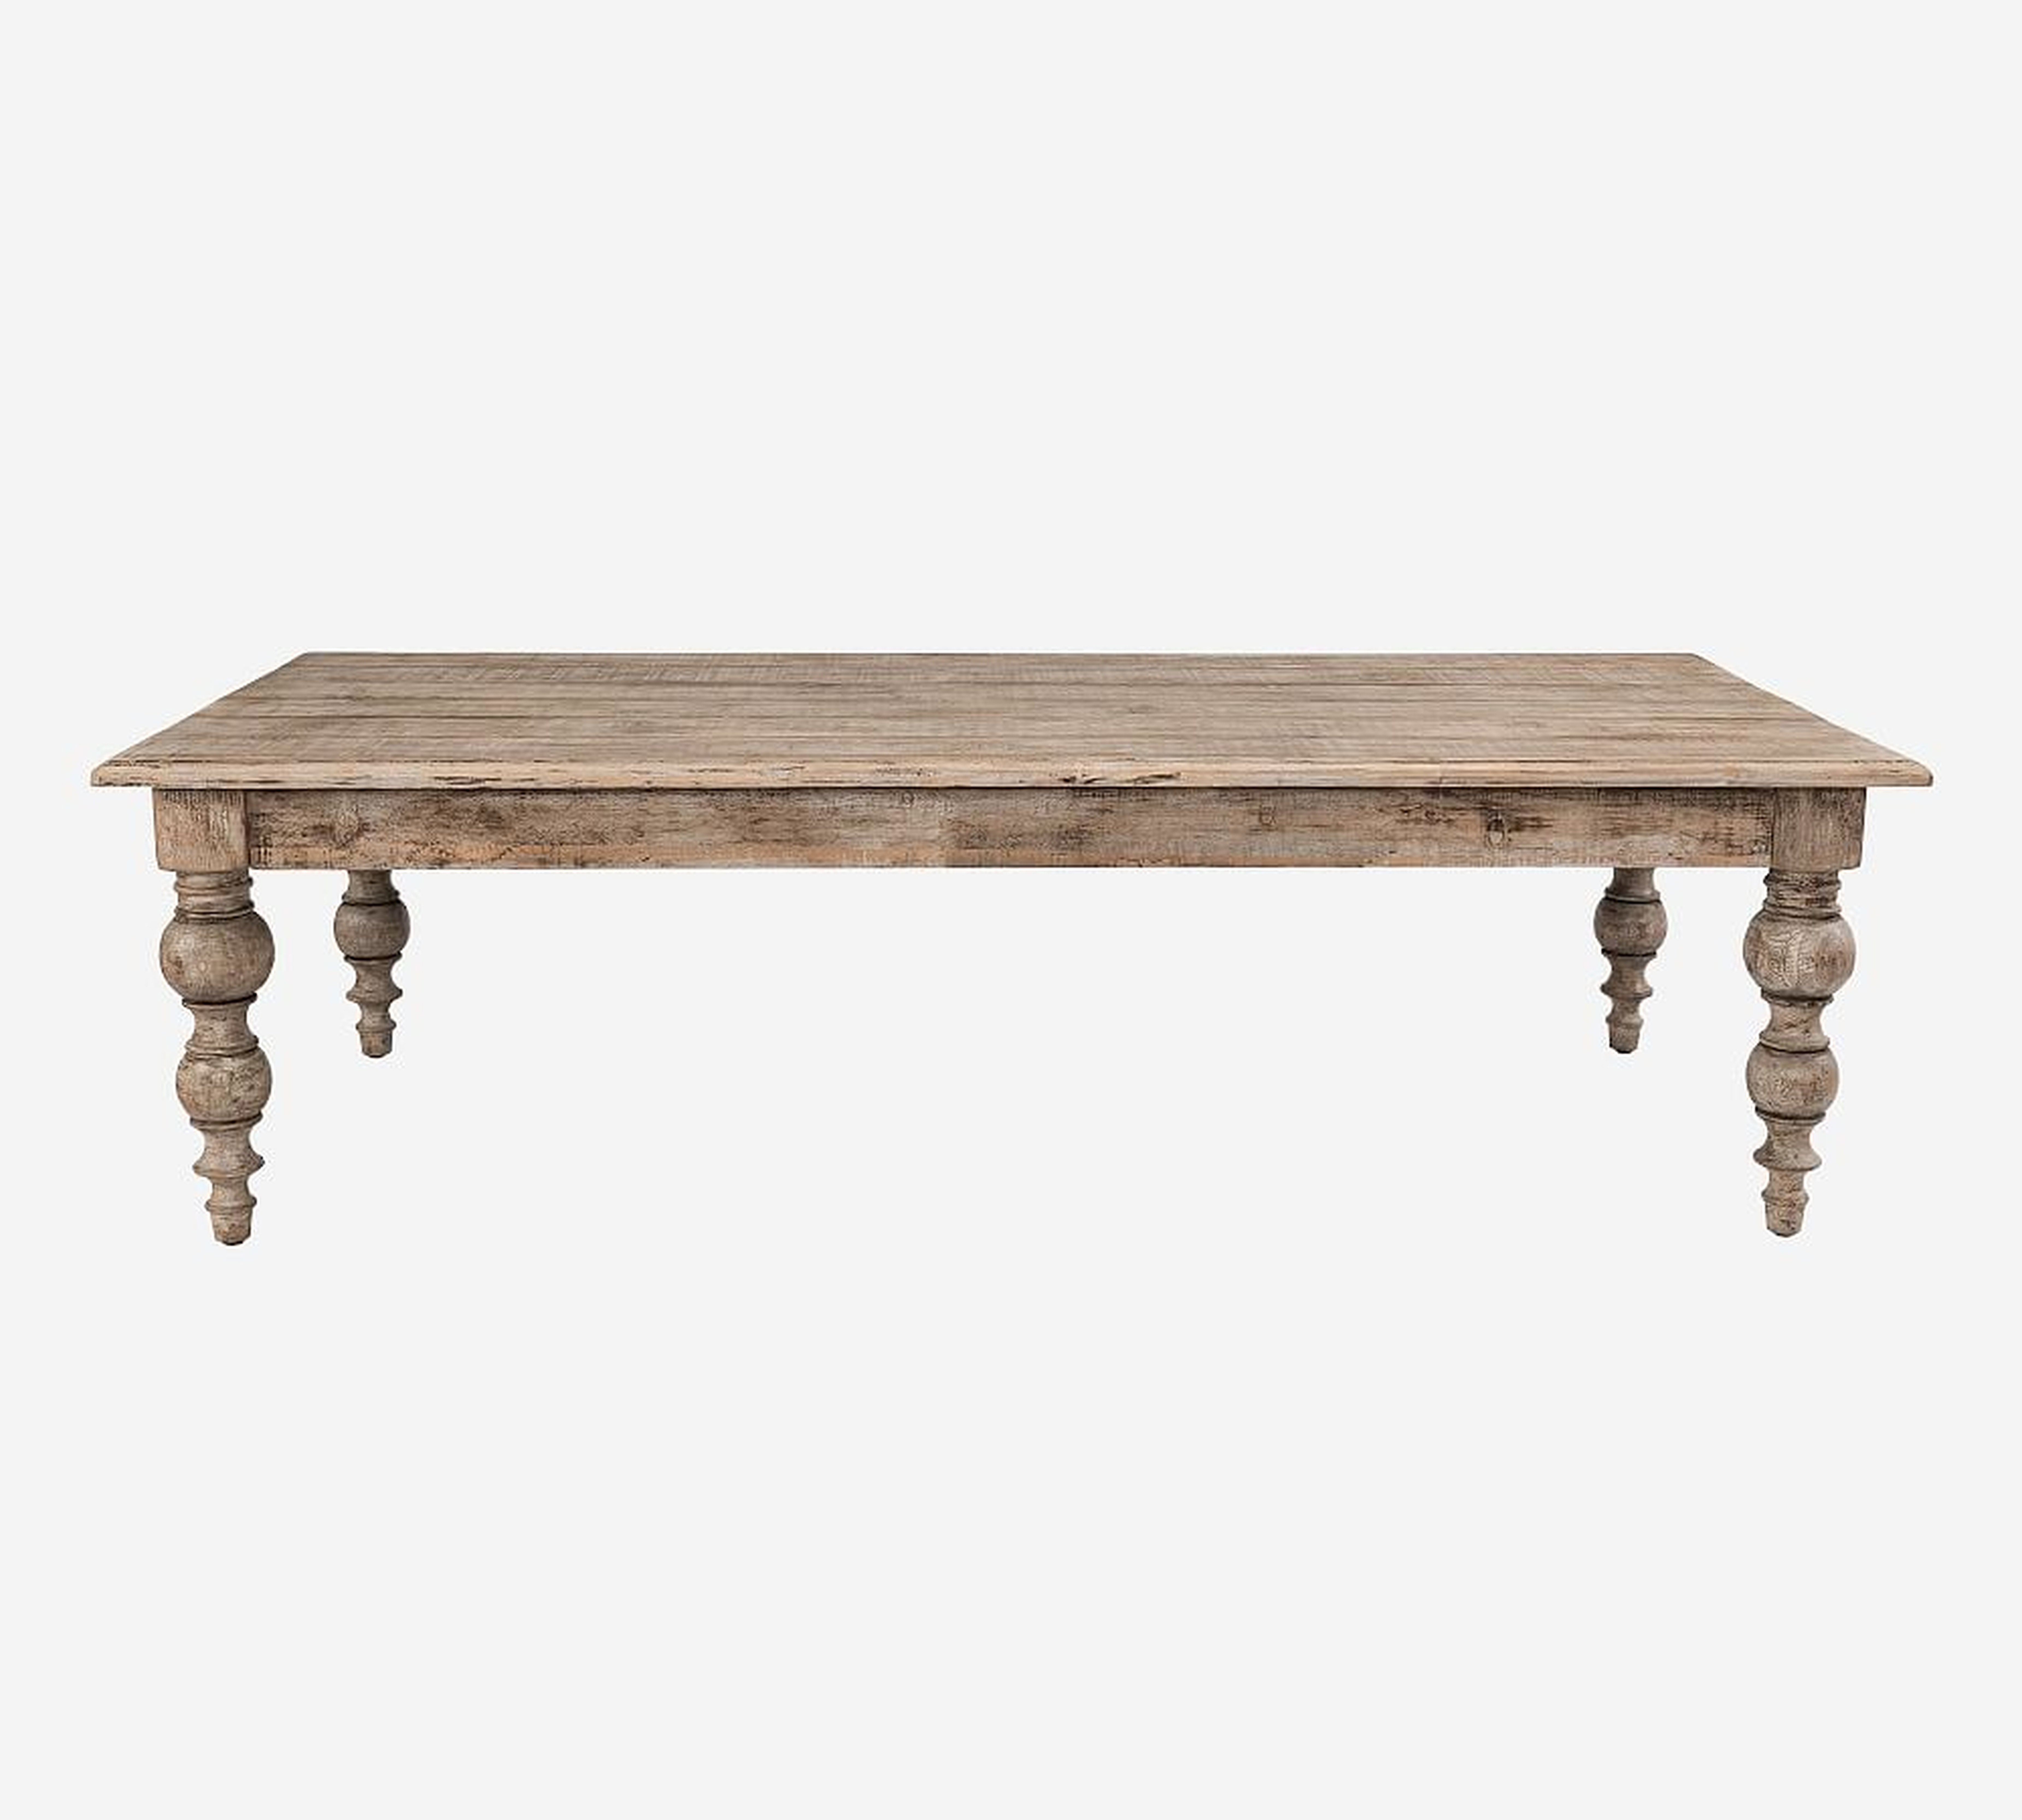 Bander 64" Rectangular Reclaimed Wood Coffee Table, Natural - Pottery Barn